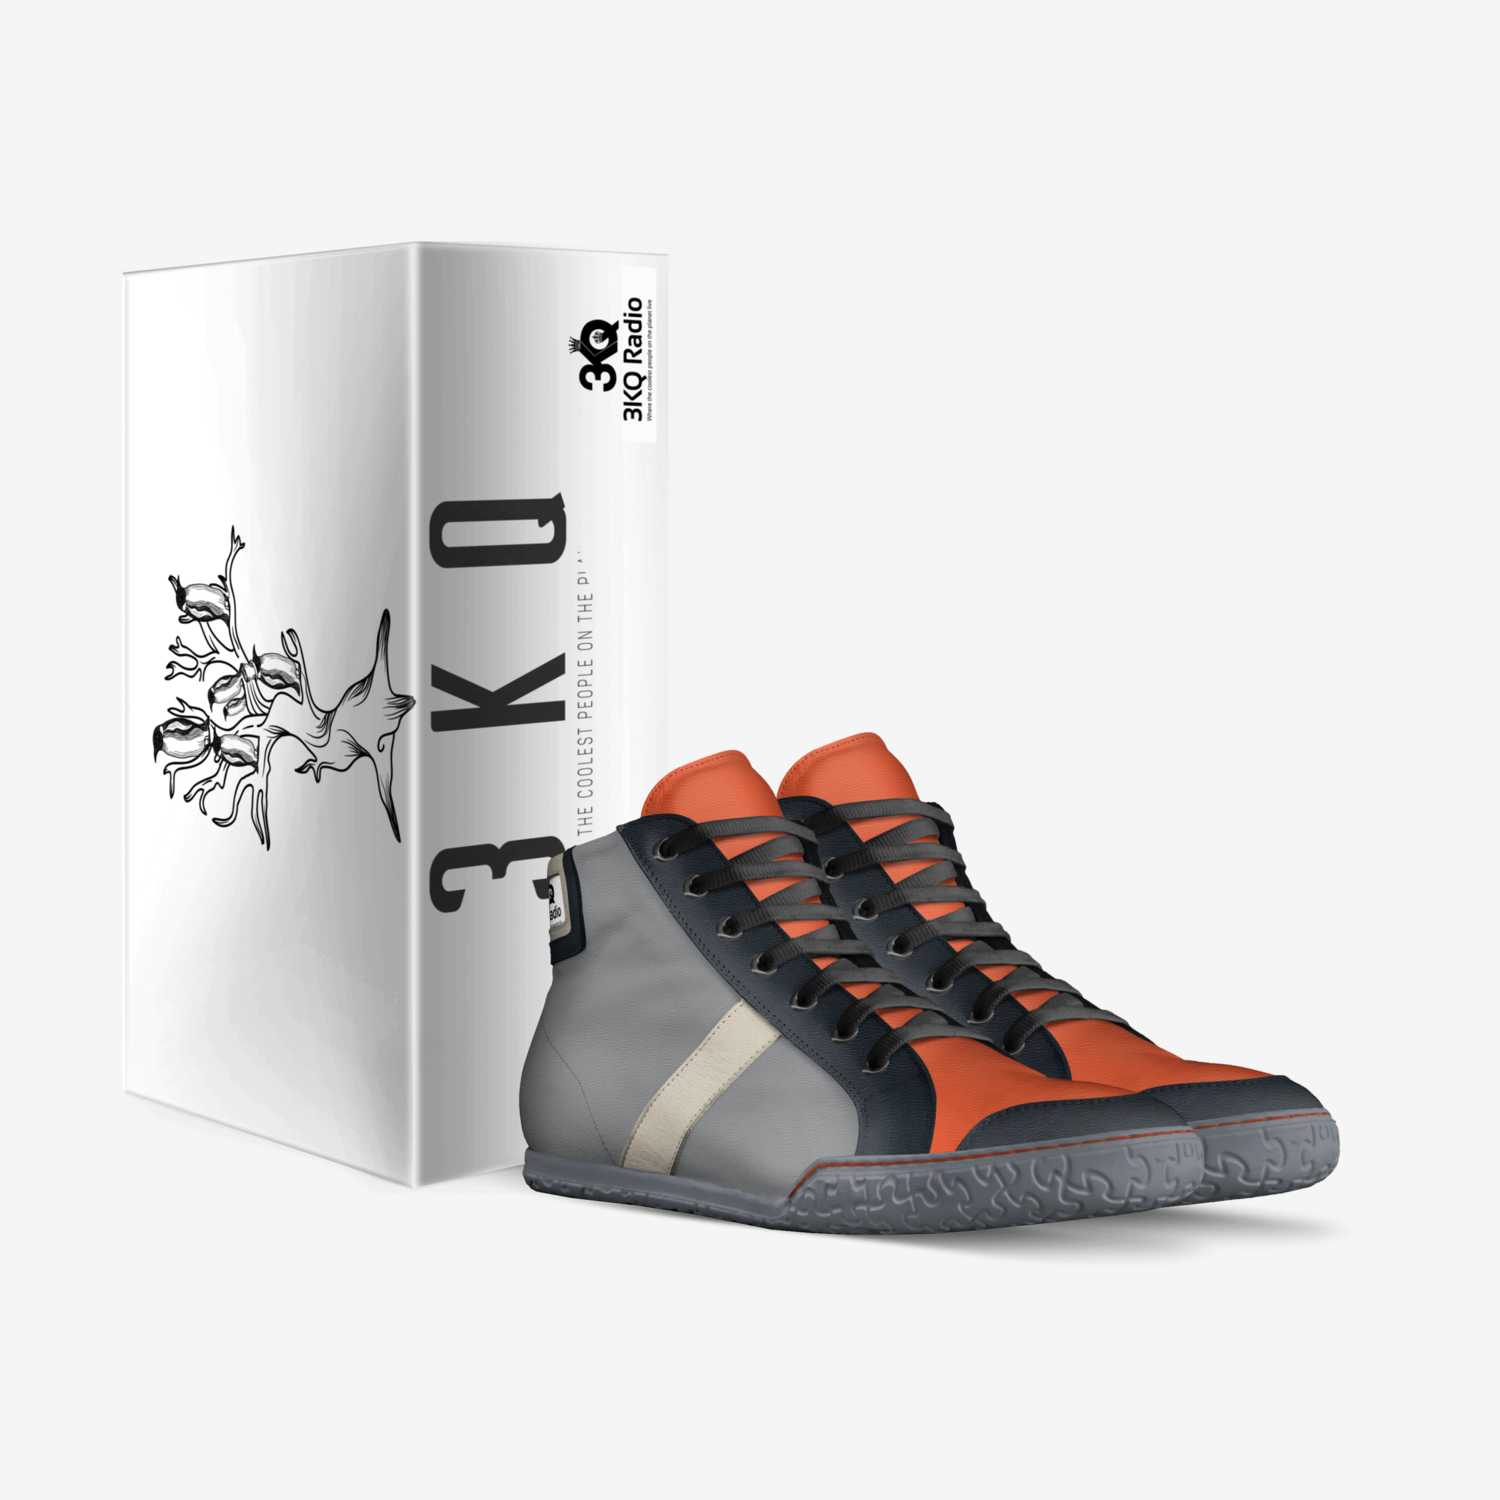 KQs custom made in Italy shoes by Chad Pierce | Box view